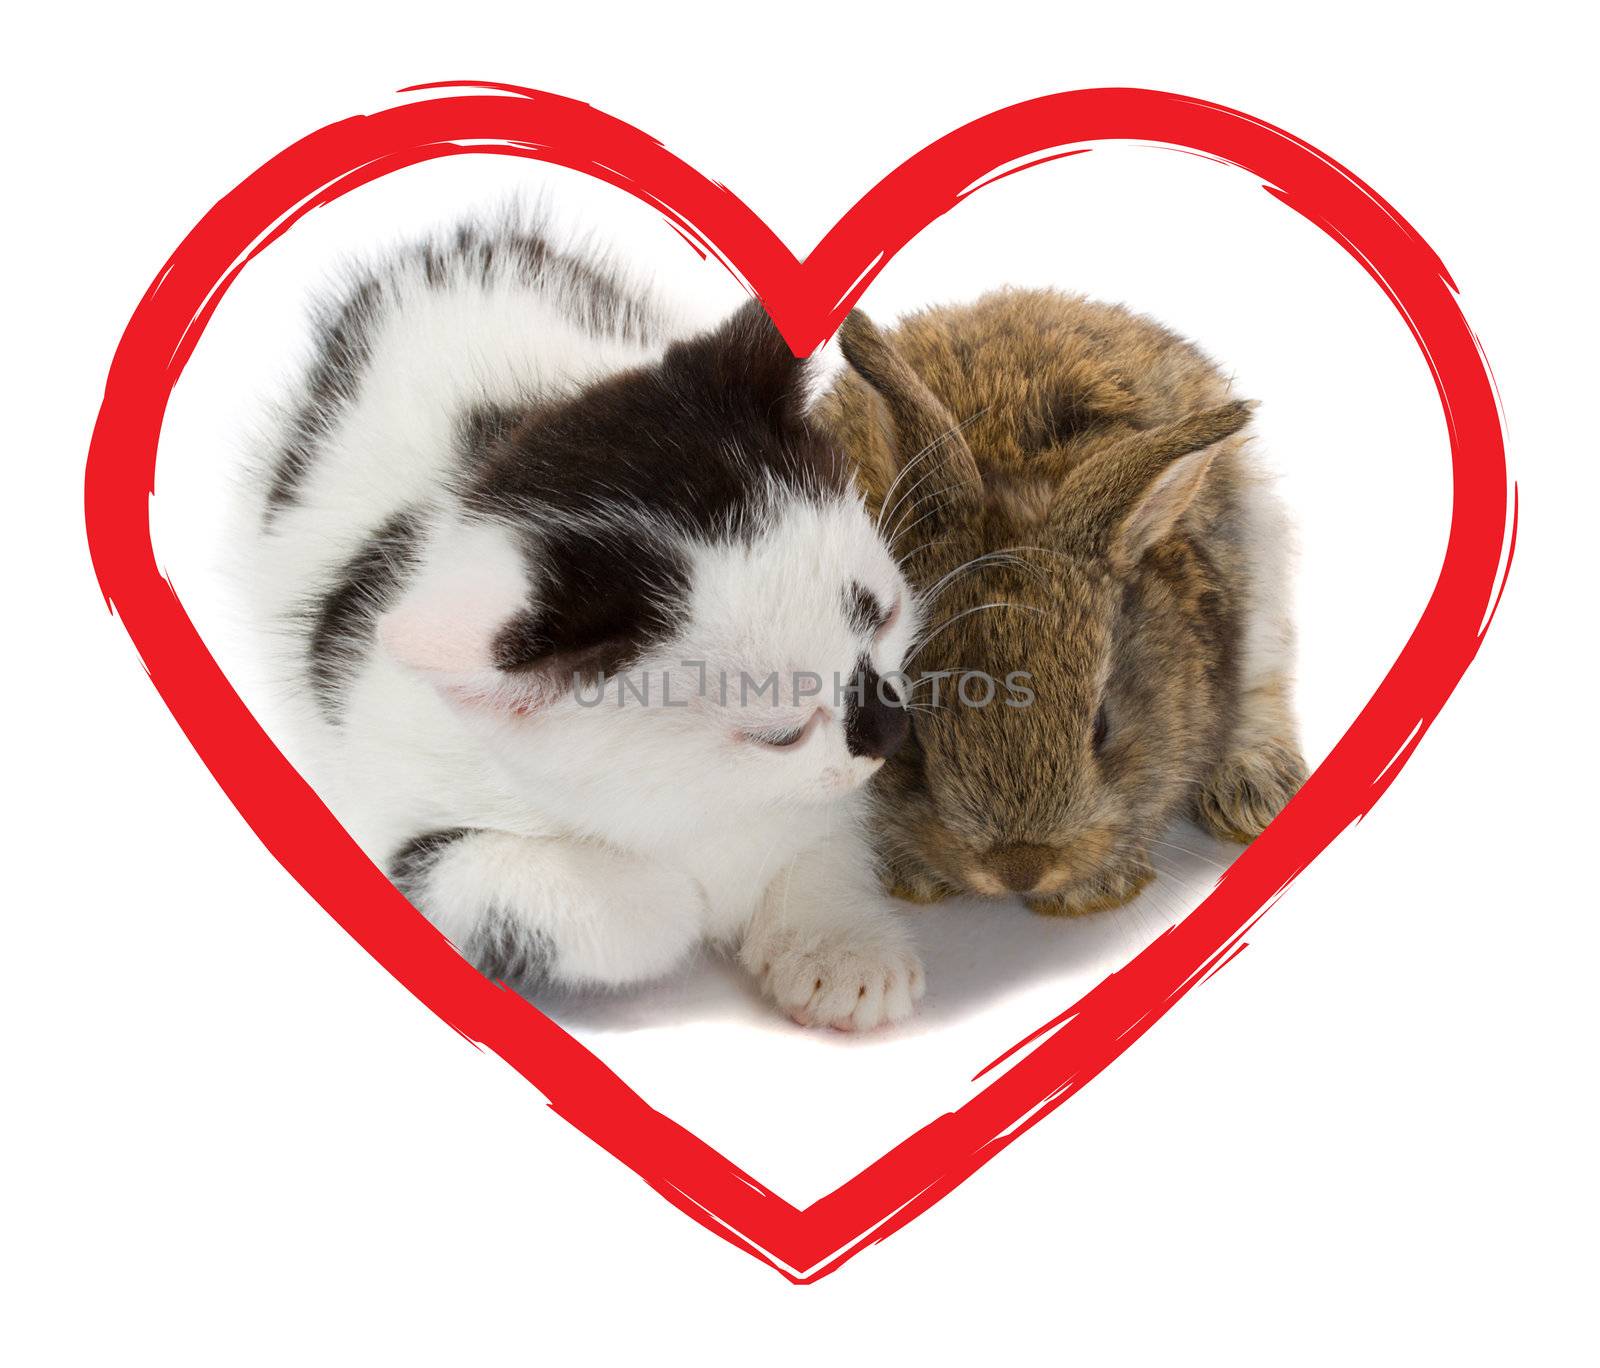 kitten and bunny in heart, isolated on white